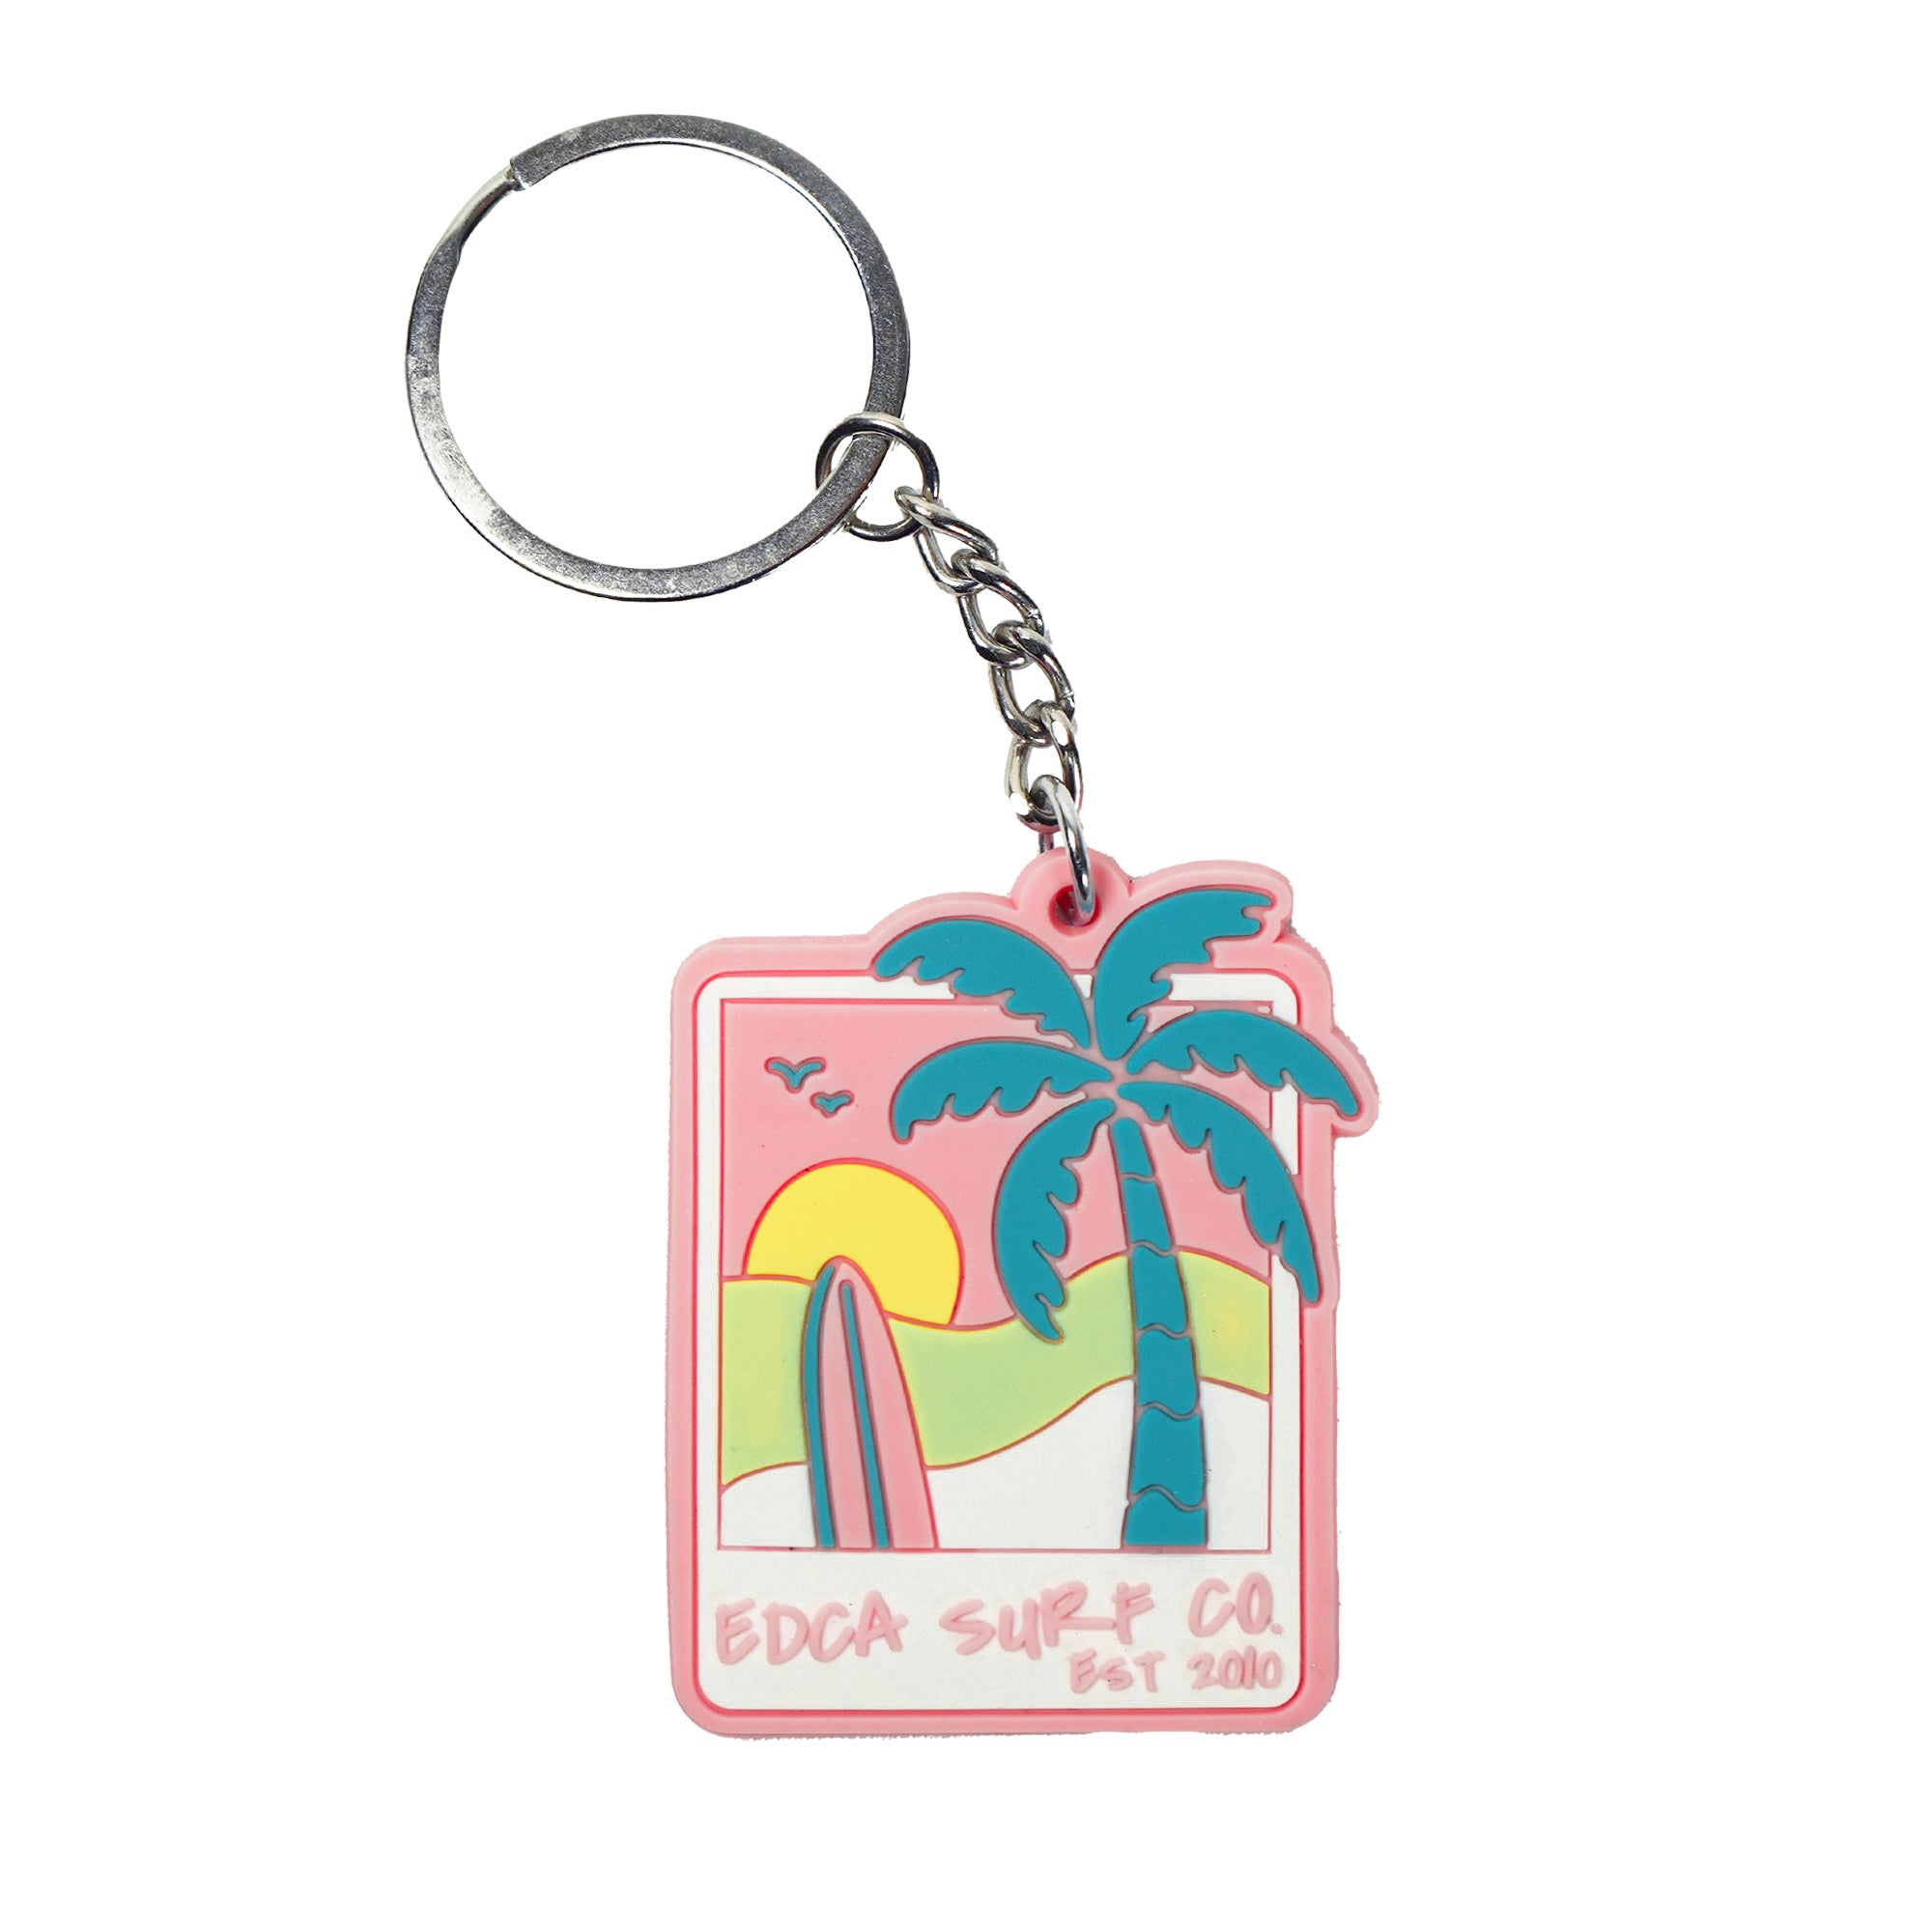 pink keychain showing an image of a sunset displaying the words "EDCA Surf Co"